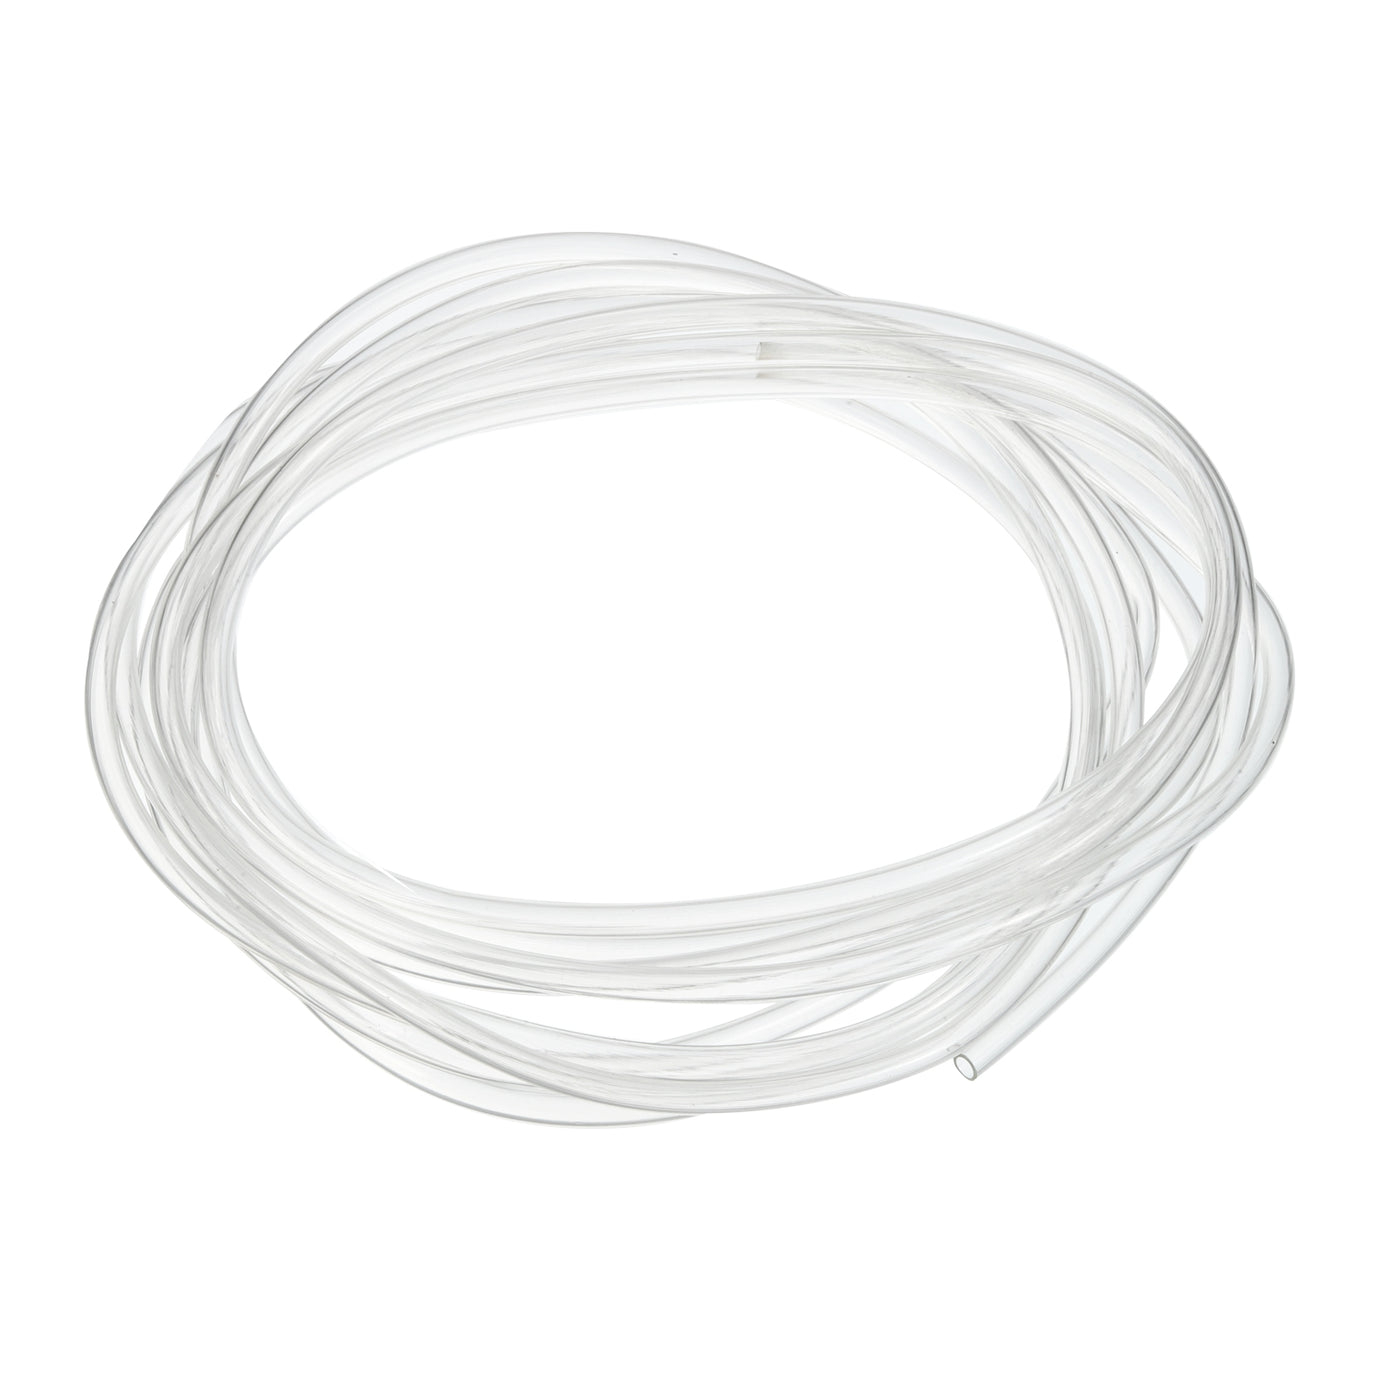 uxcell Uxcell Clear PVC Tube Wire Harness Tubing, 1/8-inch(3mm) ID 10ft Sleeve for Wire Sheathing Wire Protection